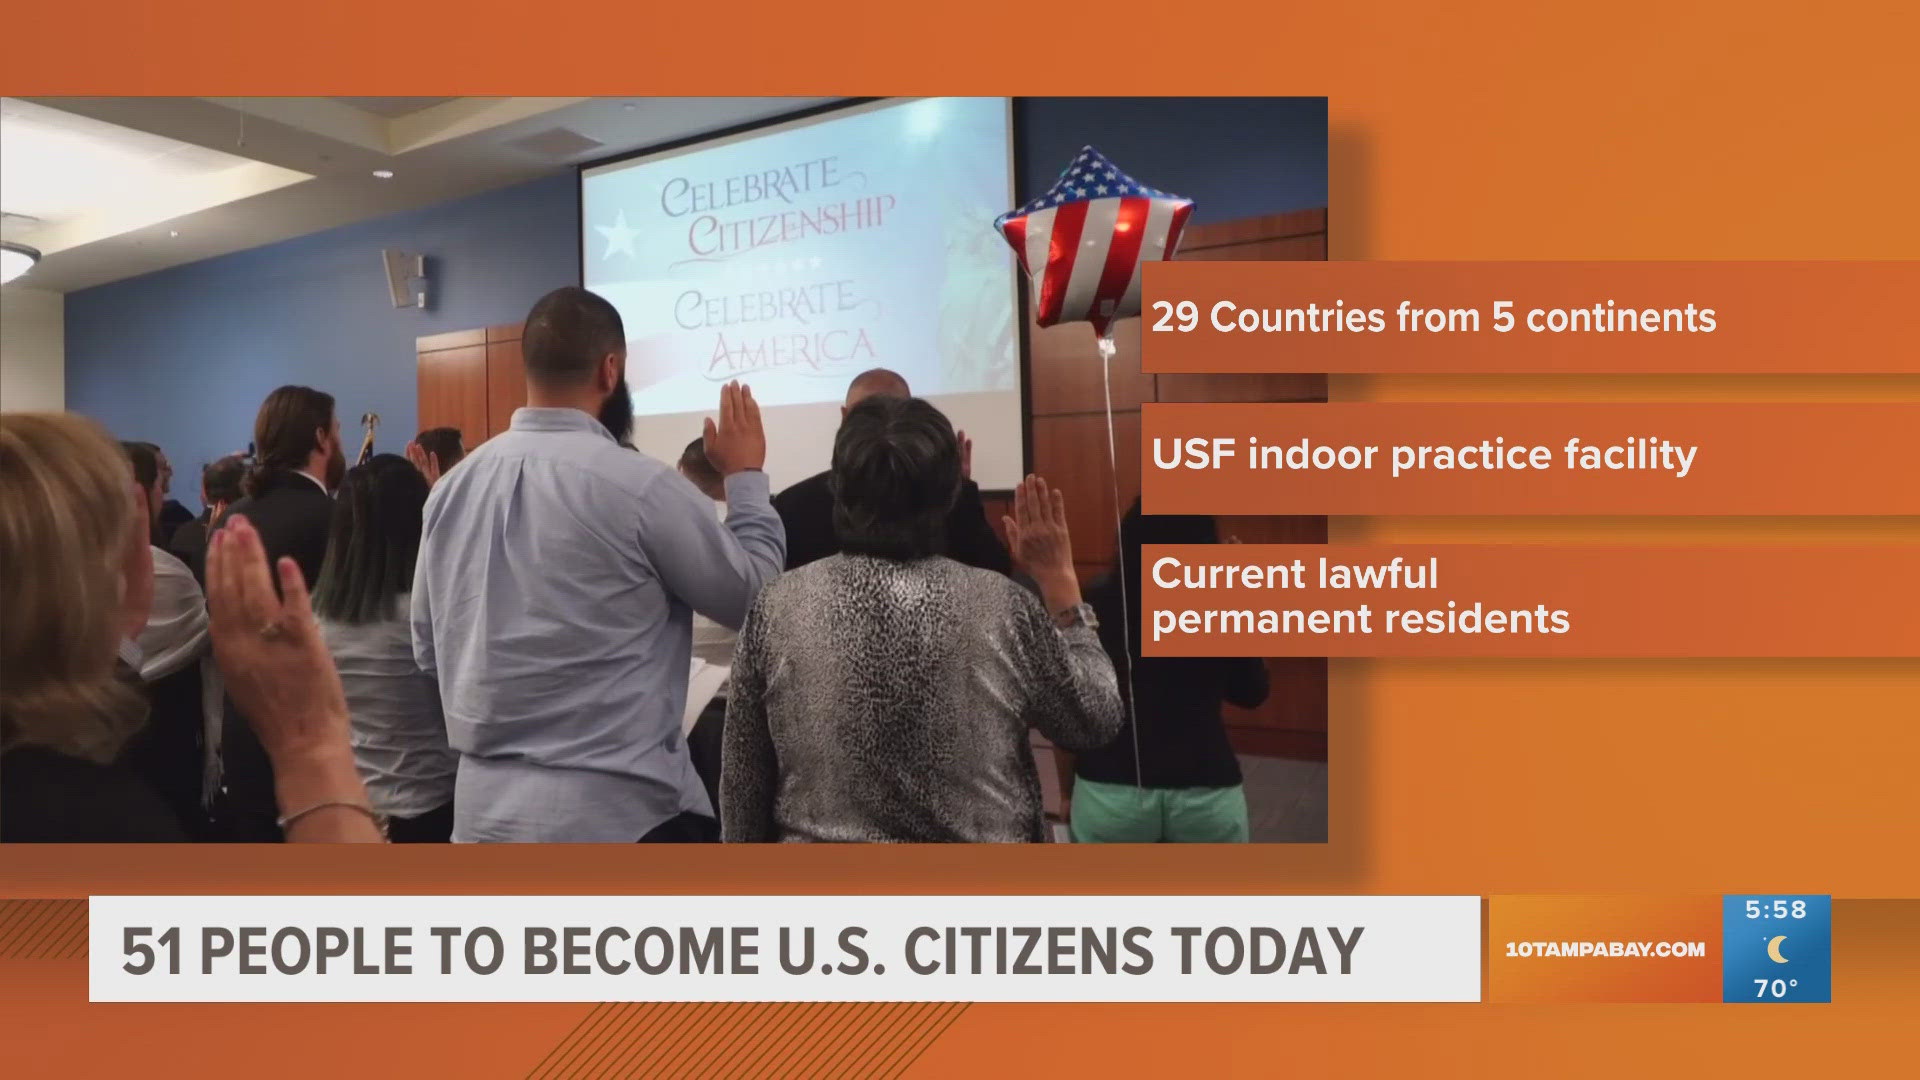 People from 29 countries across five continents are set to become U.S. citizens.